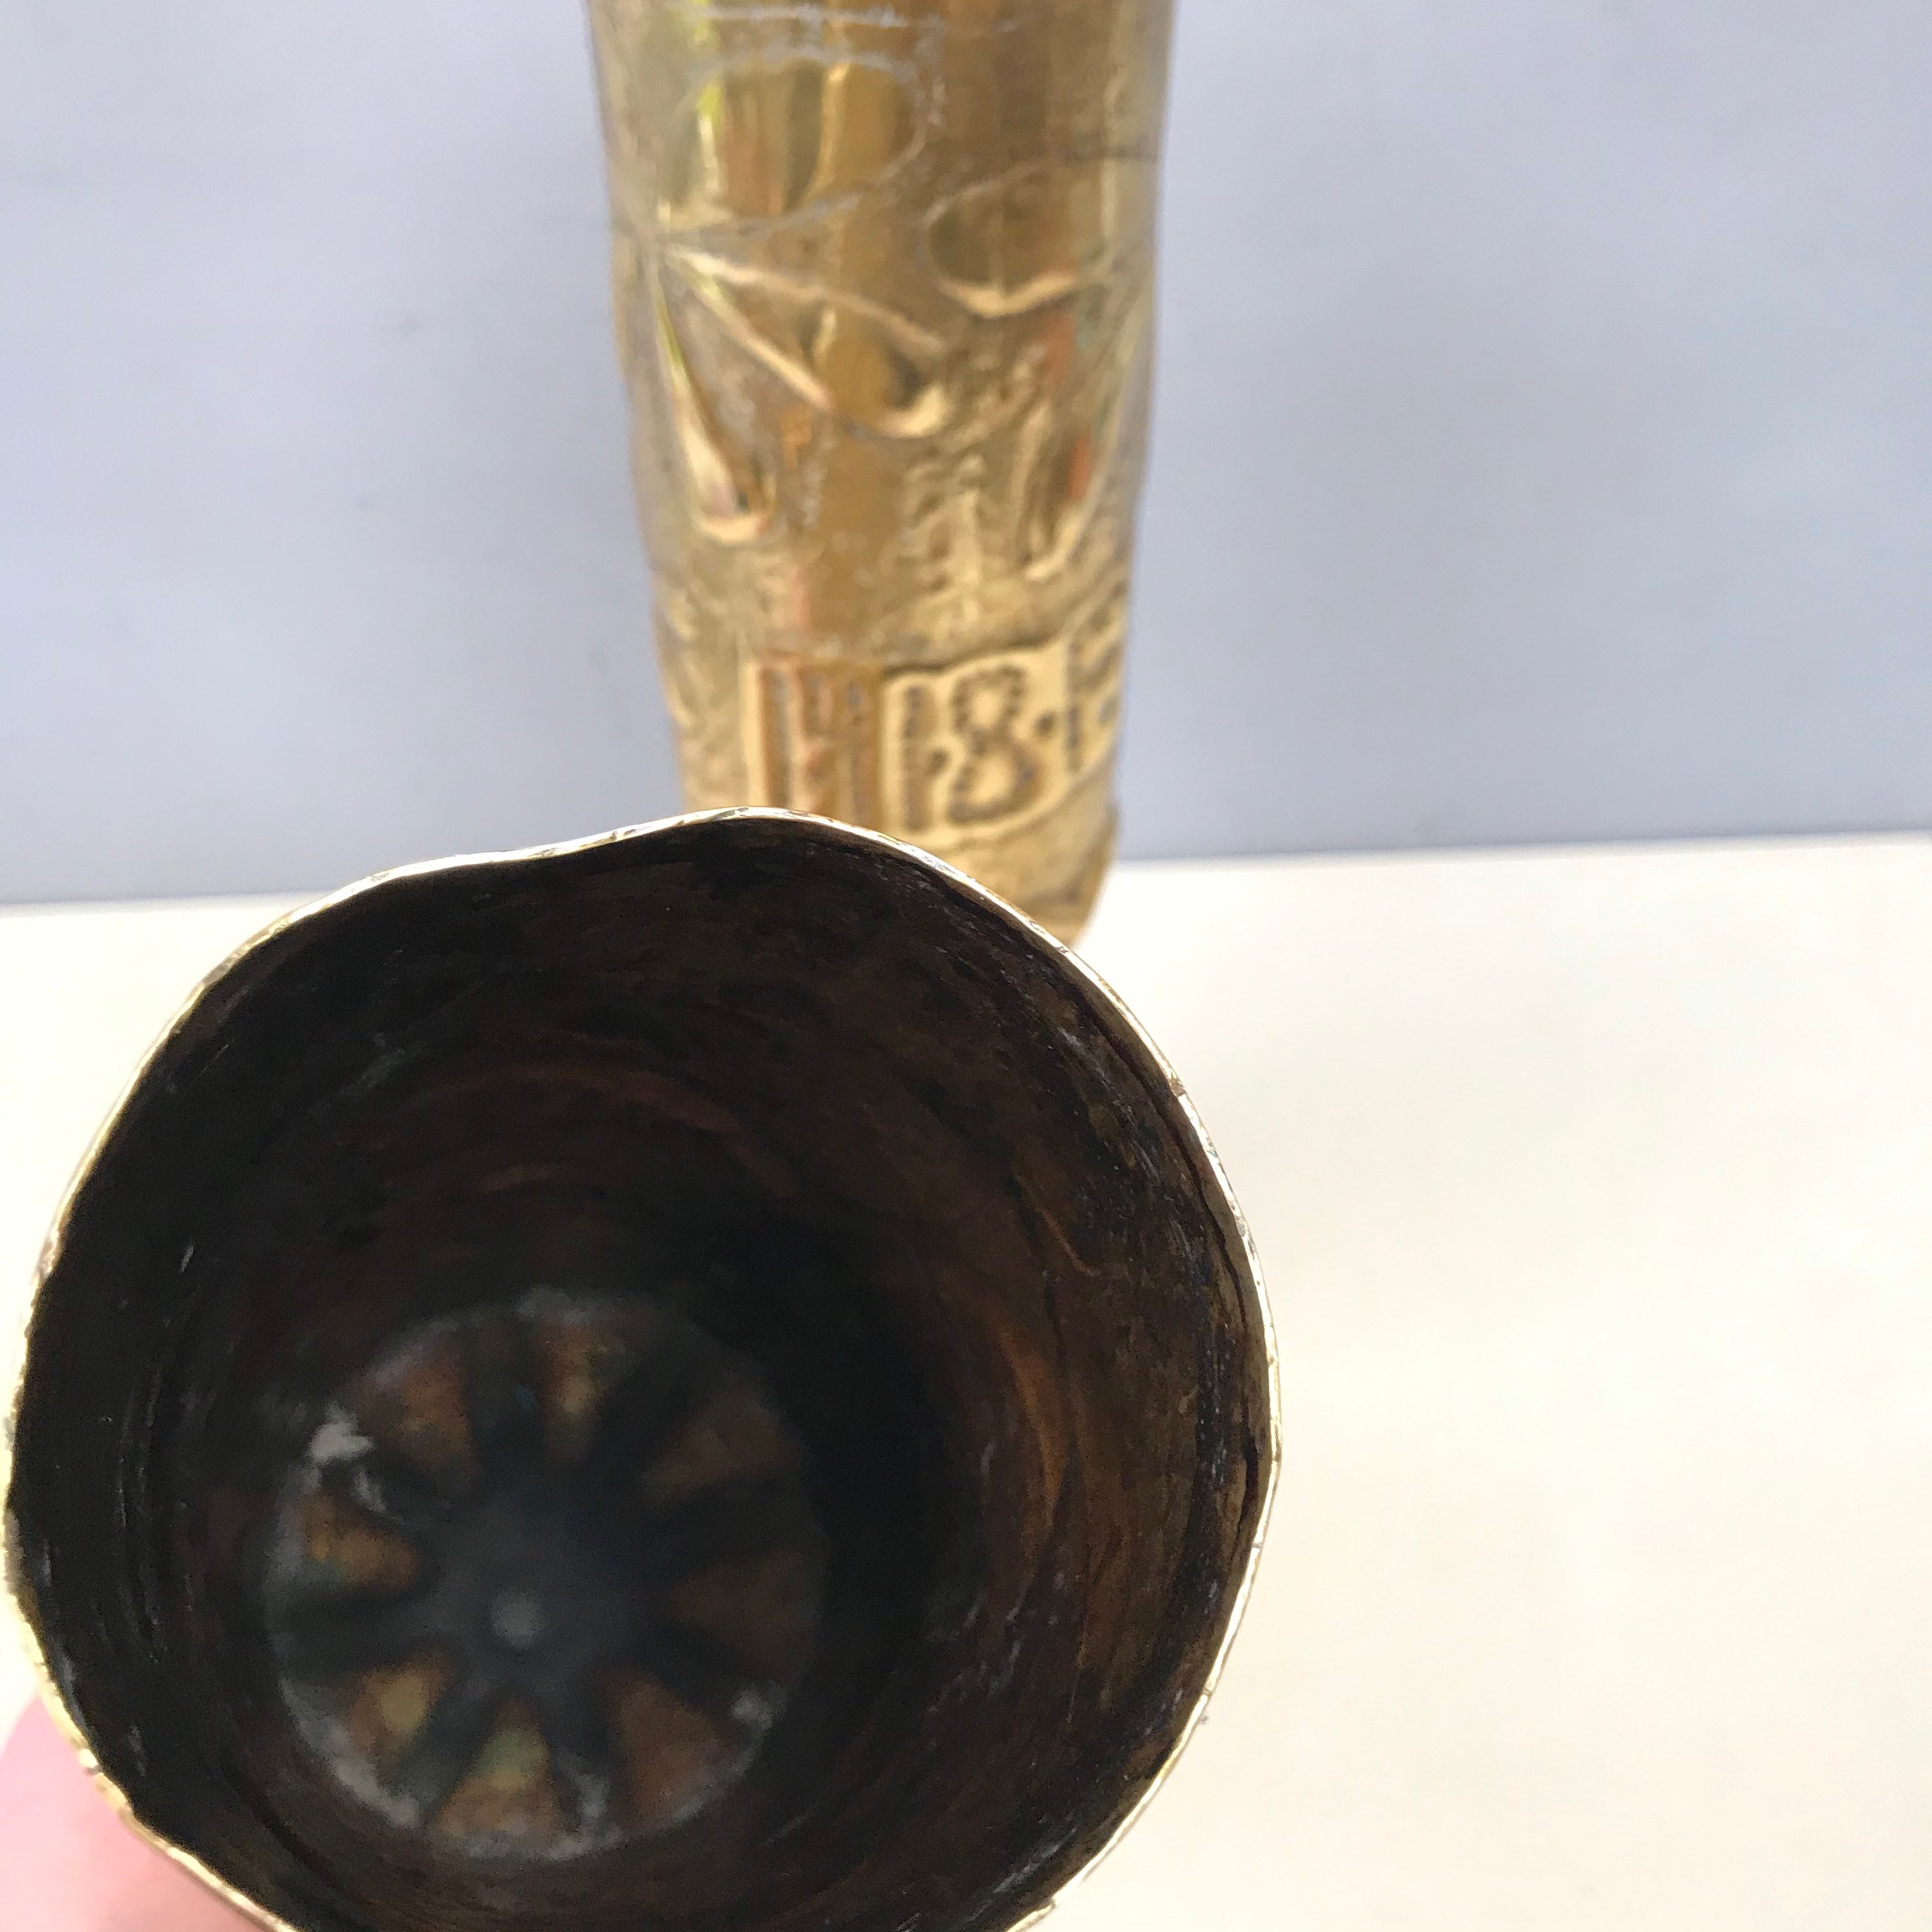 World War Trench Art Pair of Brass Artillery Shell Casing Vases Handmade  With Flowers Perfect for Remembrance Day 1418 F 